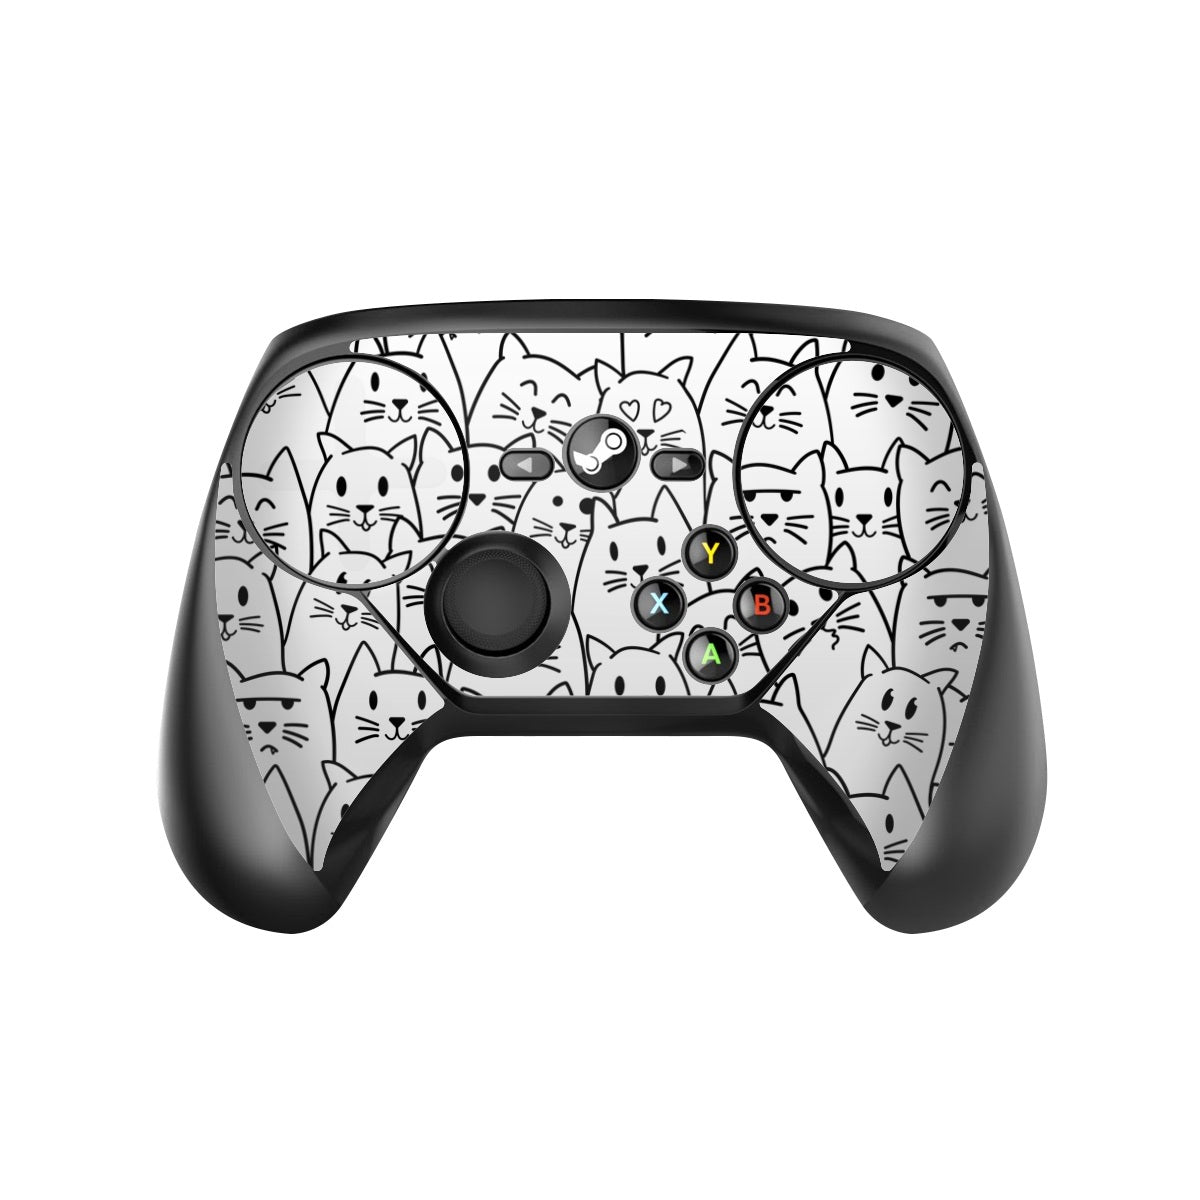 Moody Cats - Valve Steam Controller Skin